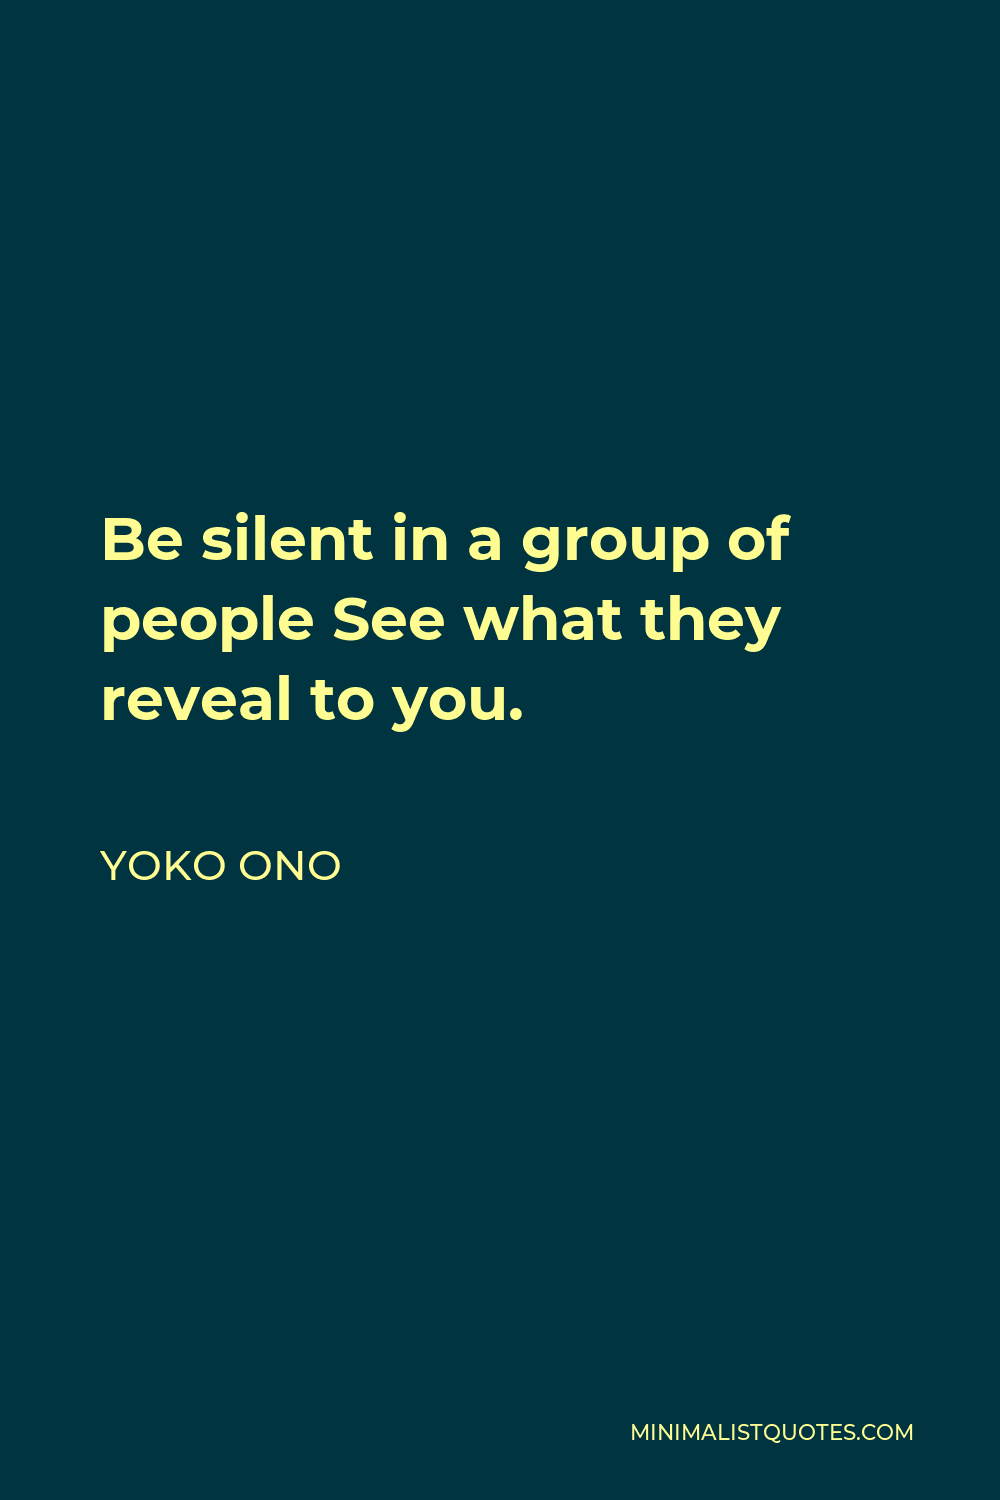 Yoko Ono Quote - Be silent in a group of people See what they reveal to you.